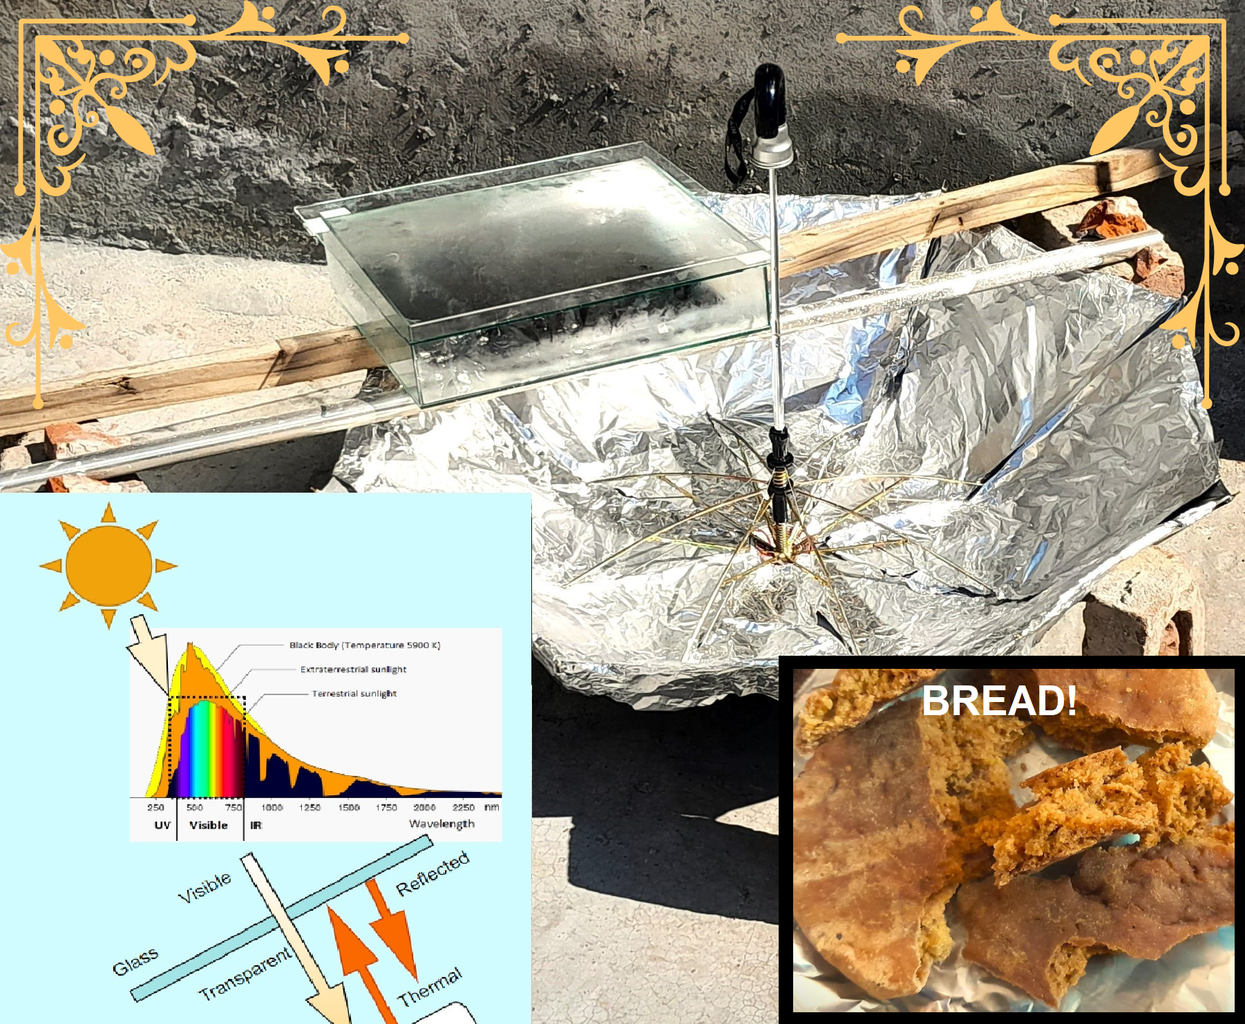 "Sun-Brella Greenhouse Effect Cooker": Working Solar Cooker for the Vulnerable, Refugees, Eco-Enthusiasts and Creative Cooks